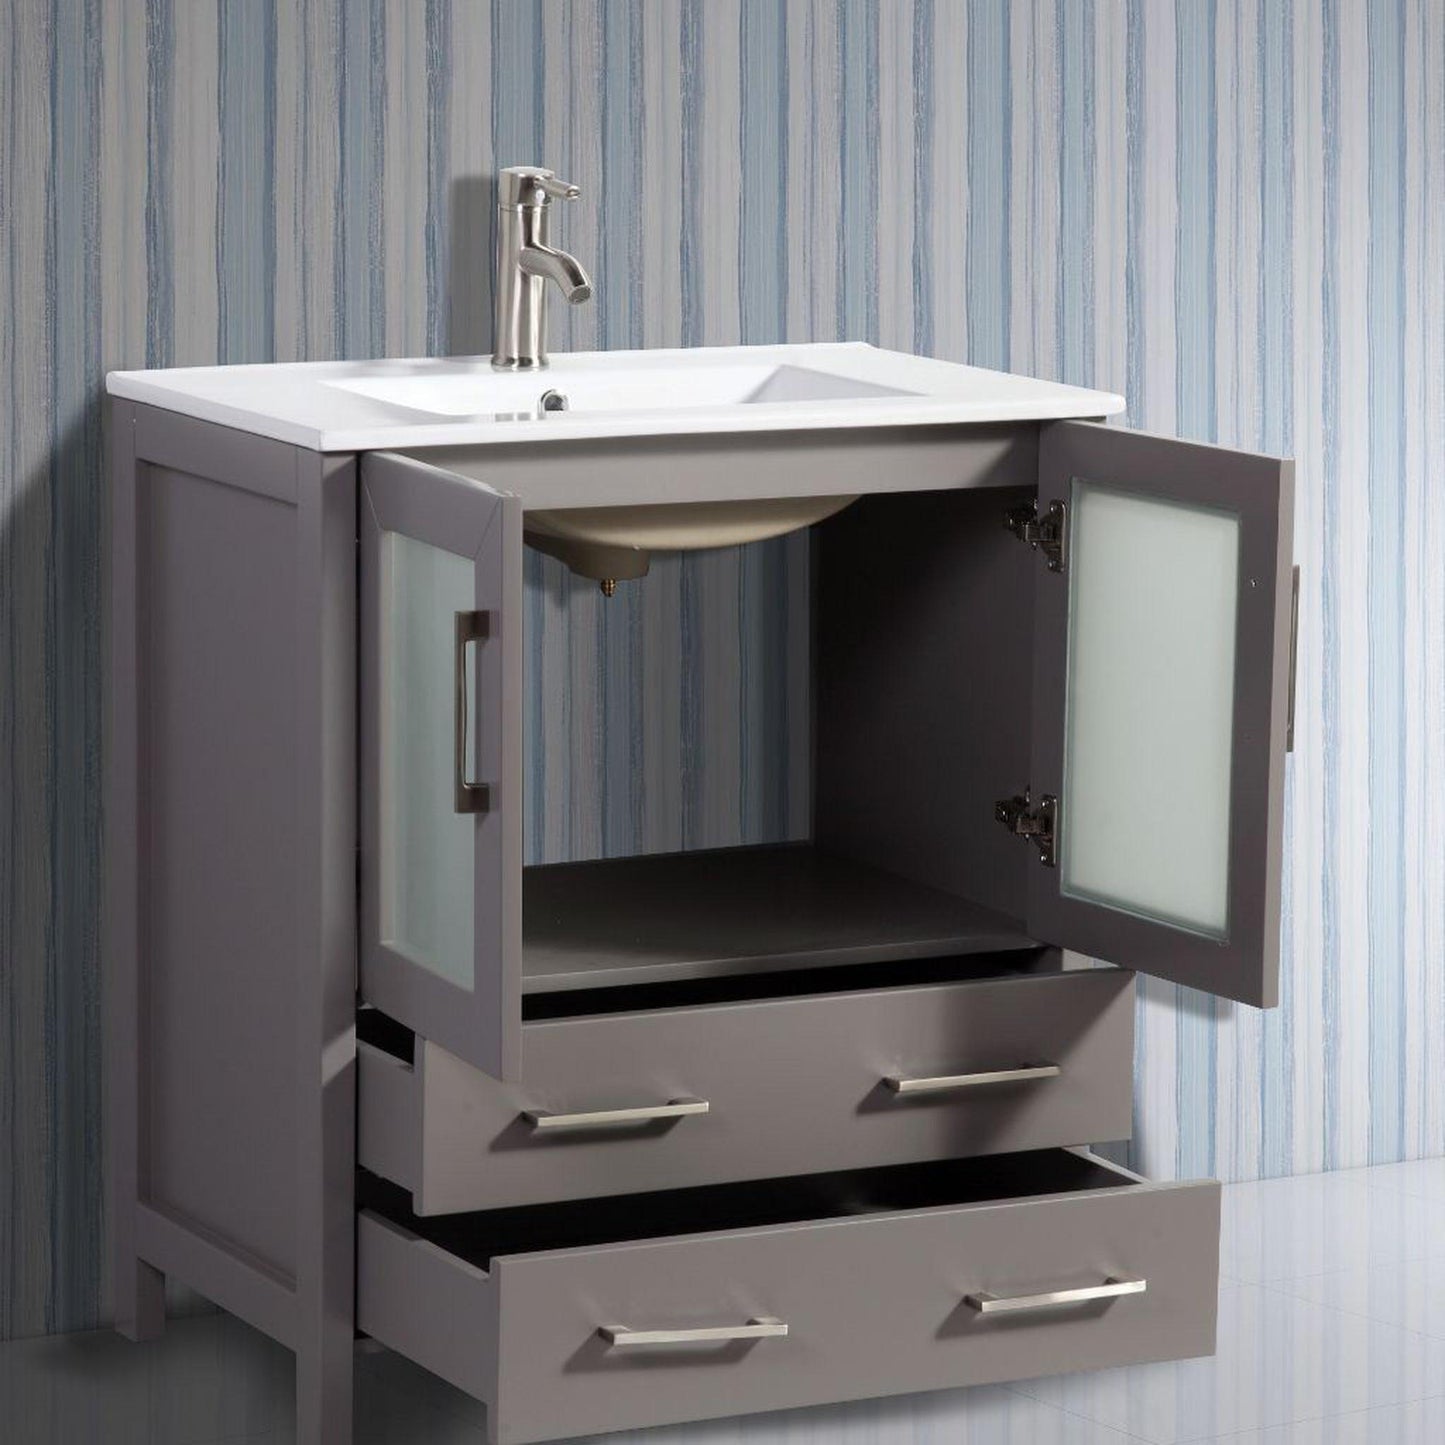 Vanity Art VA30 96" Double Gray Freestanding Modern Bathroom Vanity Set With Integrated Ceramic Sink, Compact 2 Shelves, 13 Dovetail Drawers Cabinet And 2 Mirrors